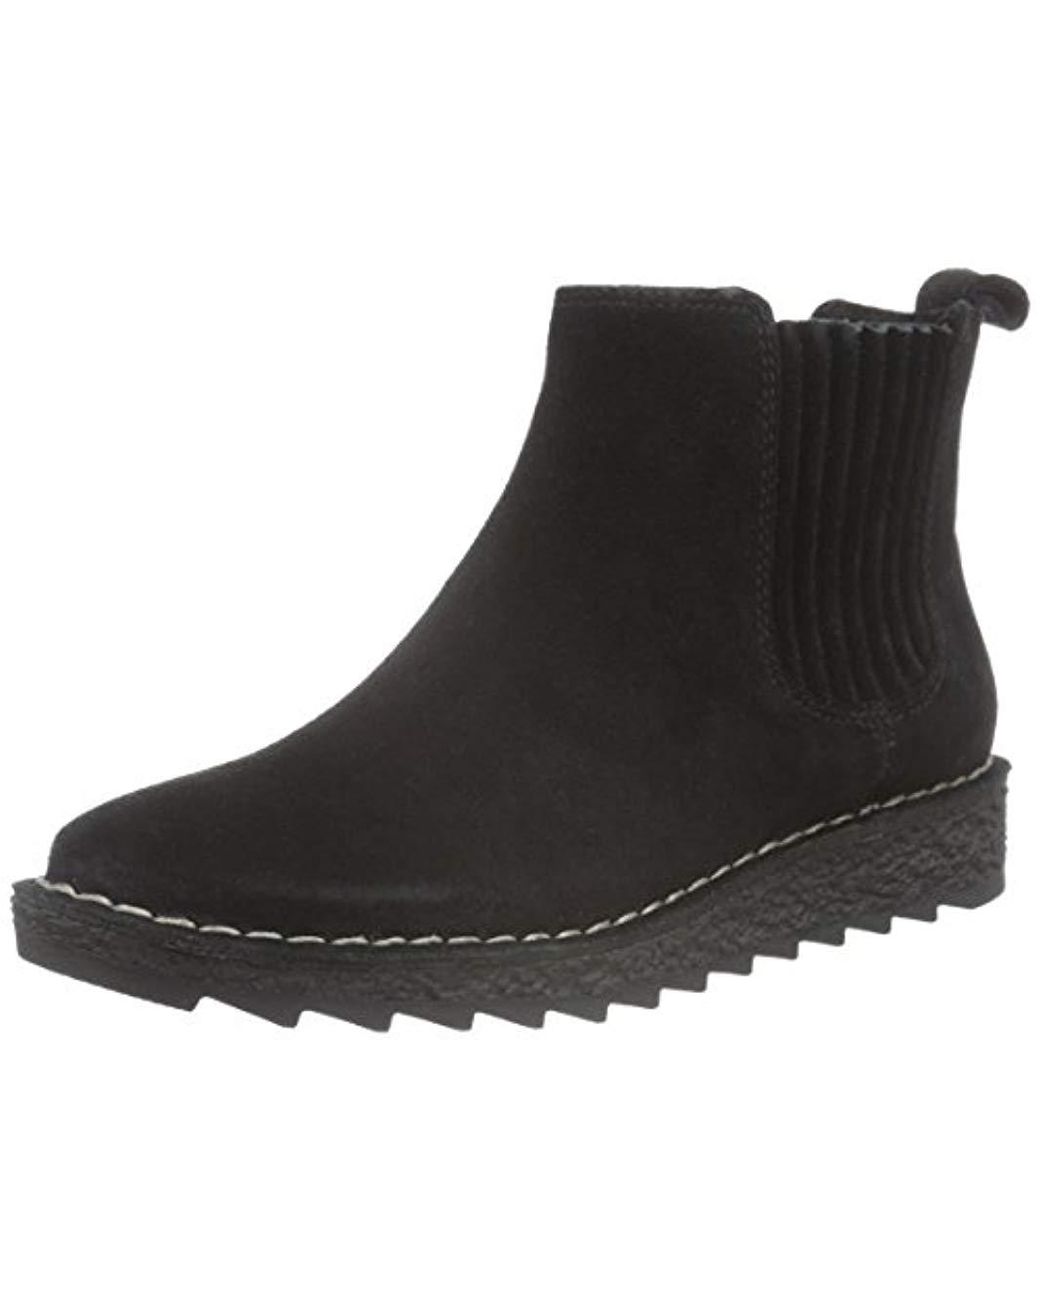 Clarks Olso Chelsea Boots in Black | Lyst UK